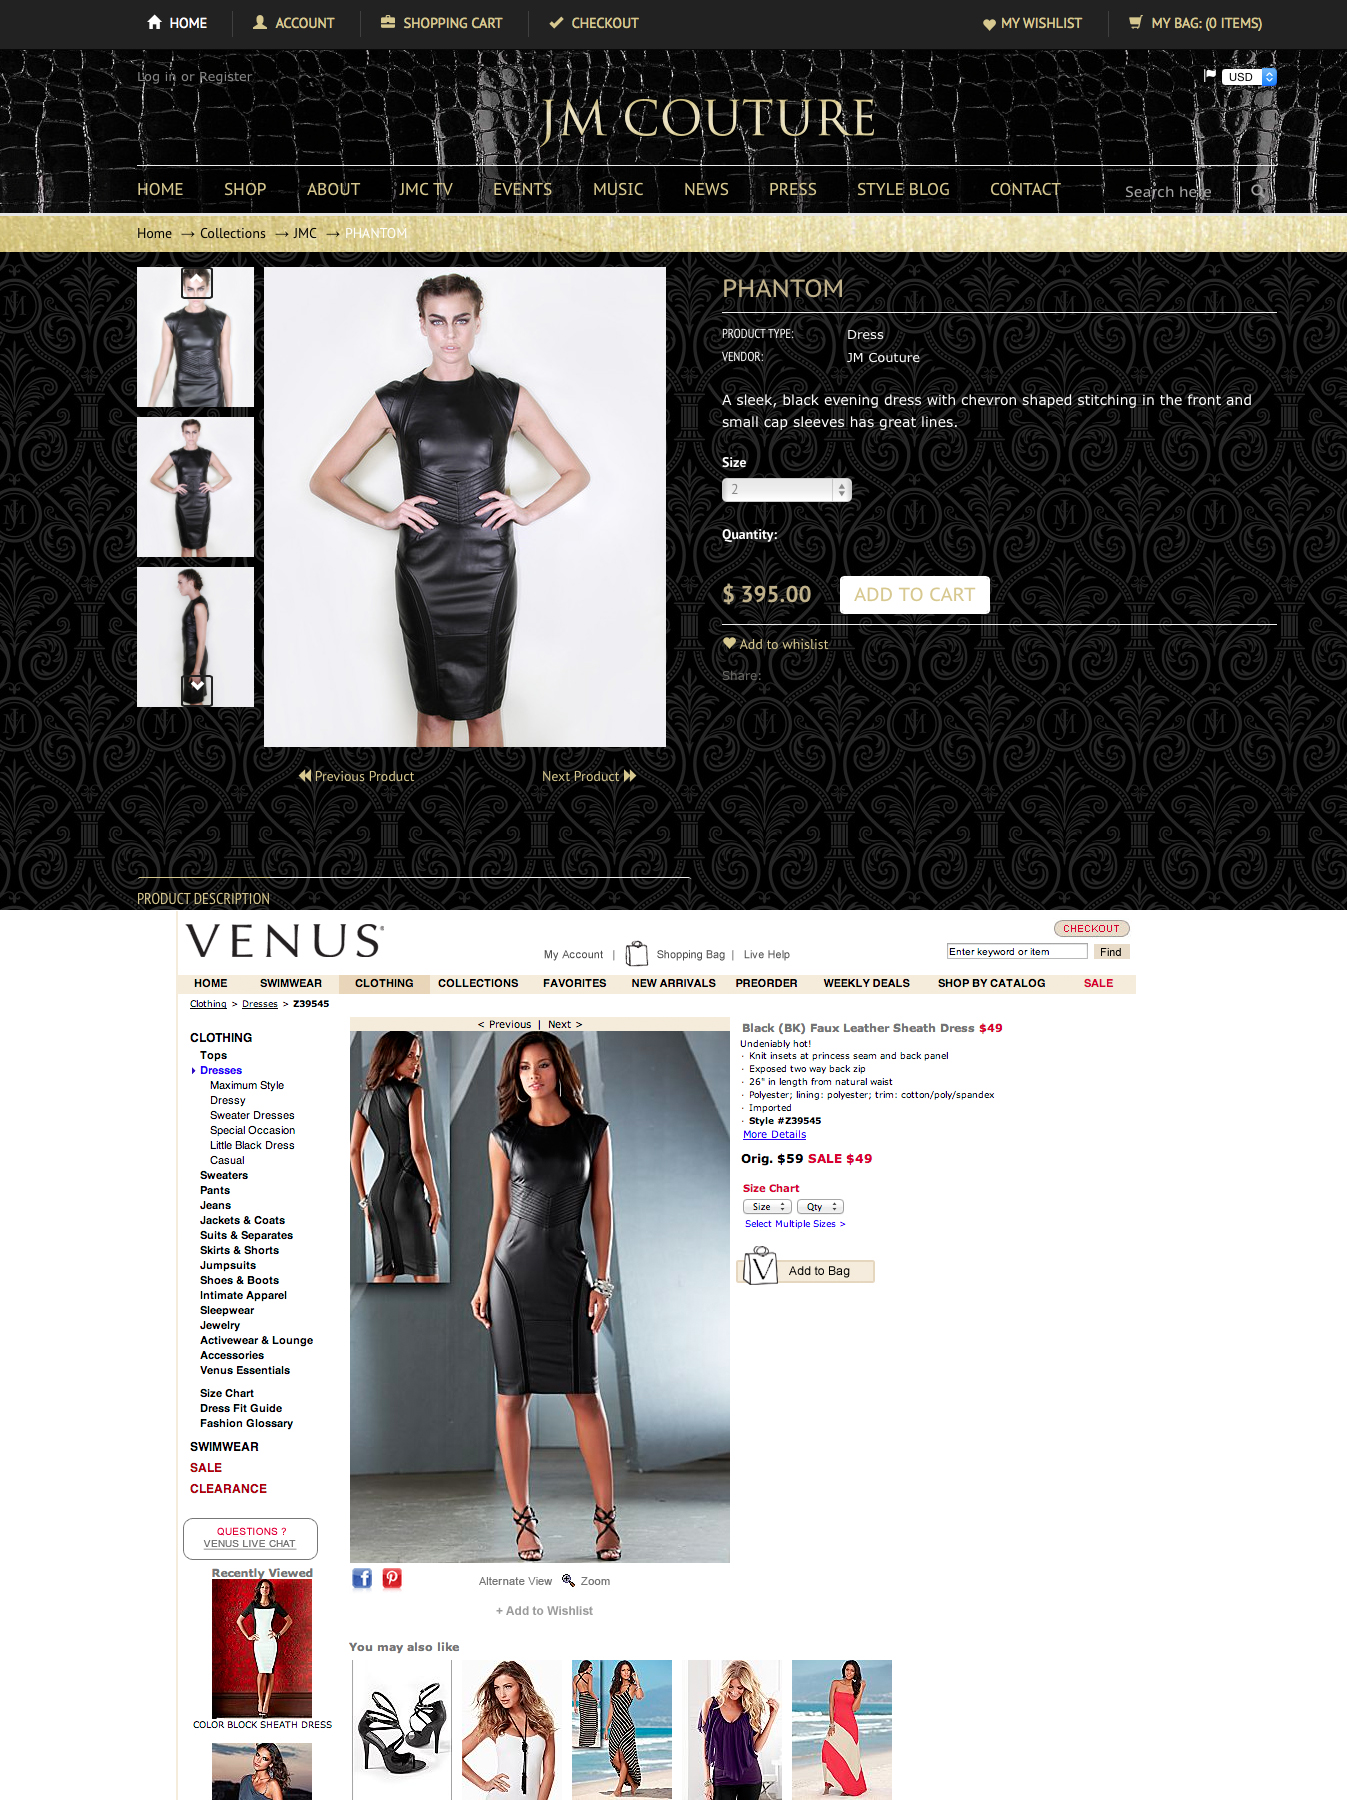 Bought on the Venus website, and Jim put his own label in the dress.